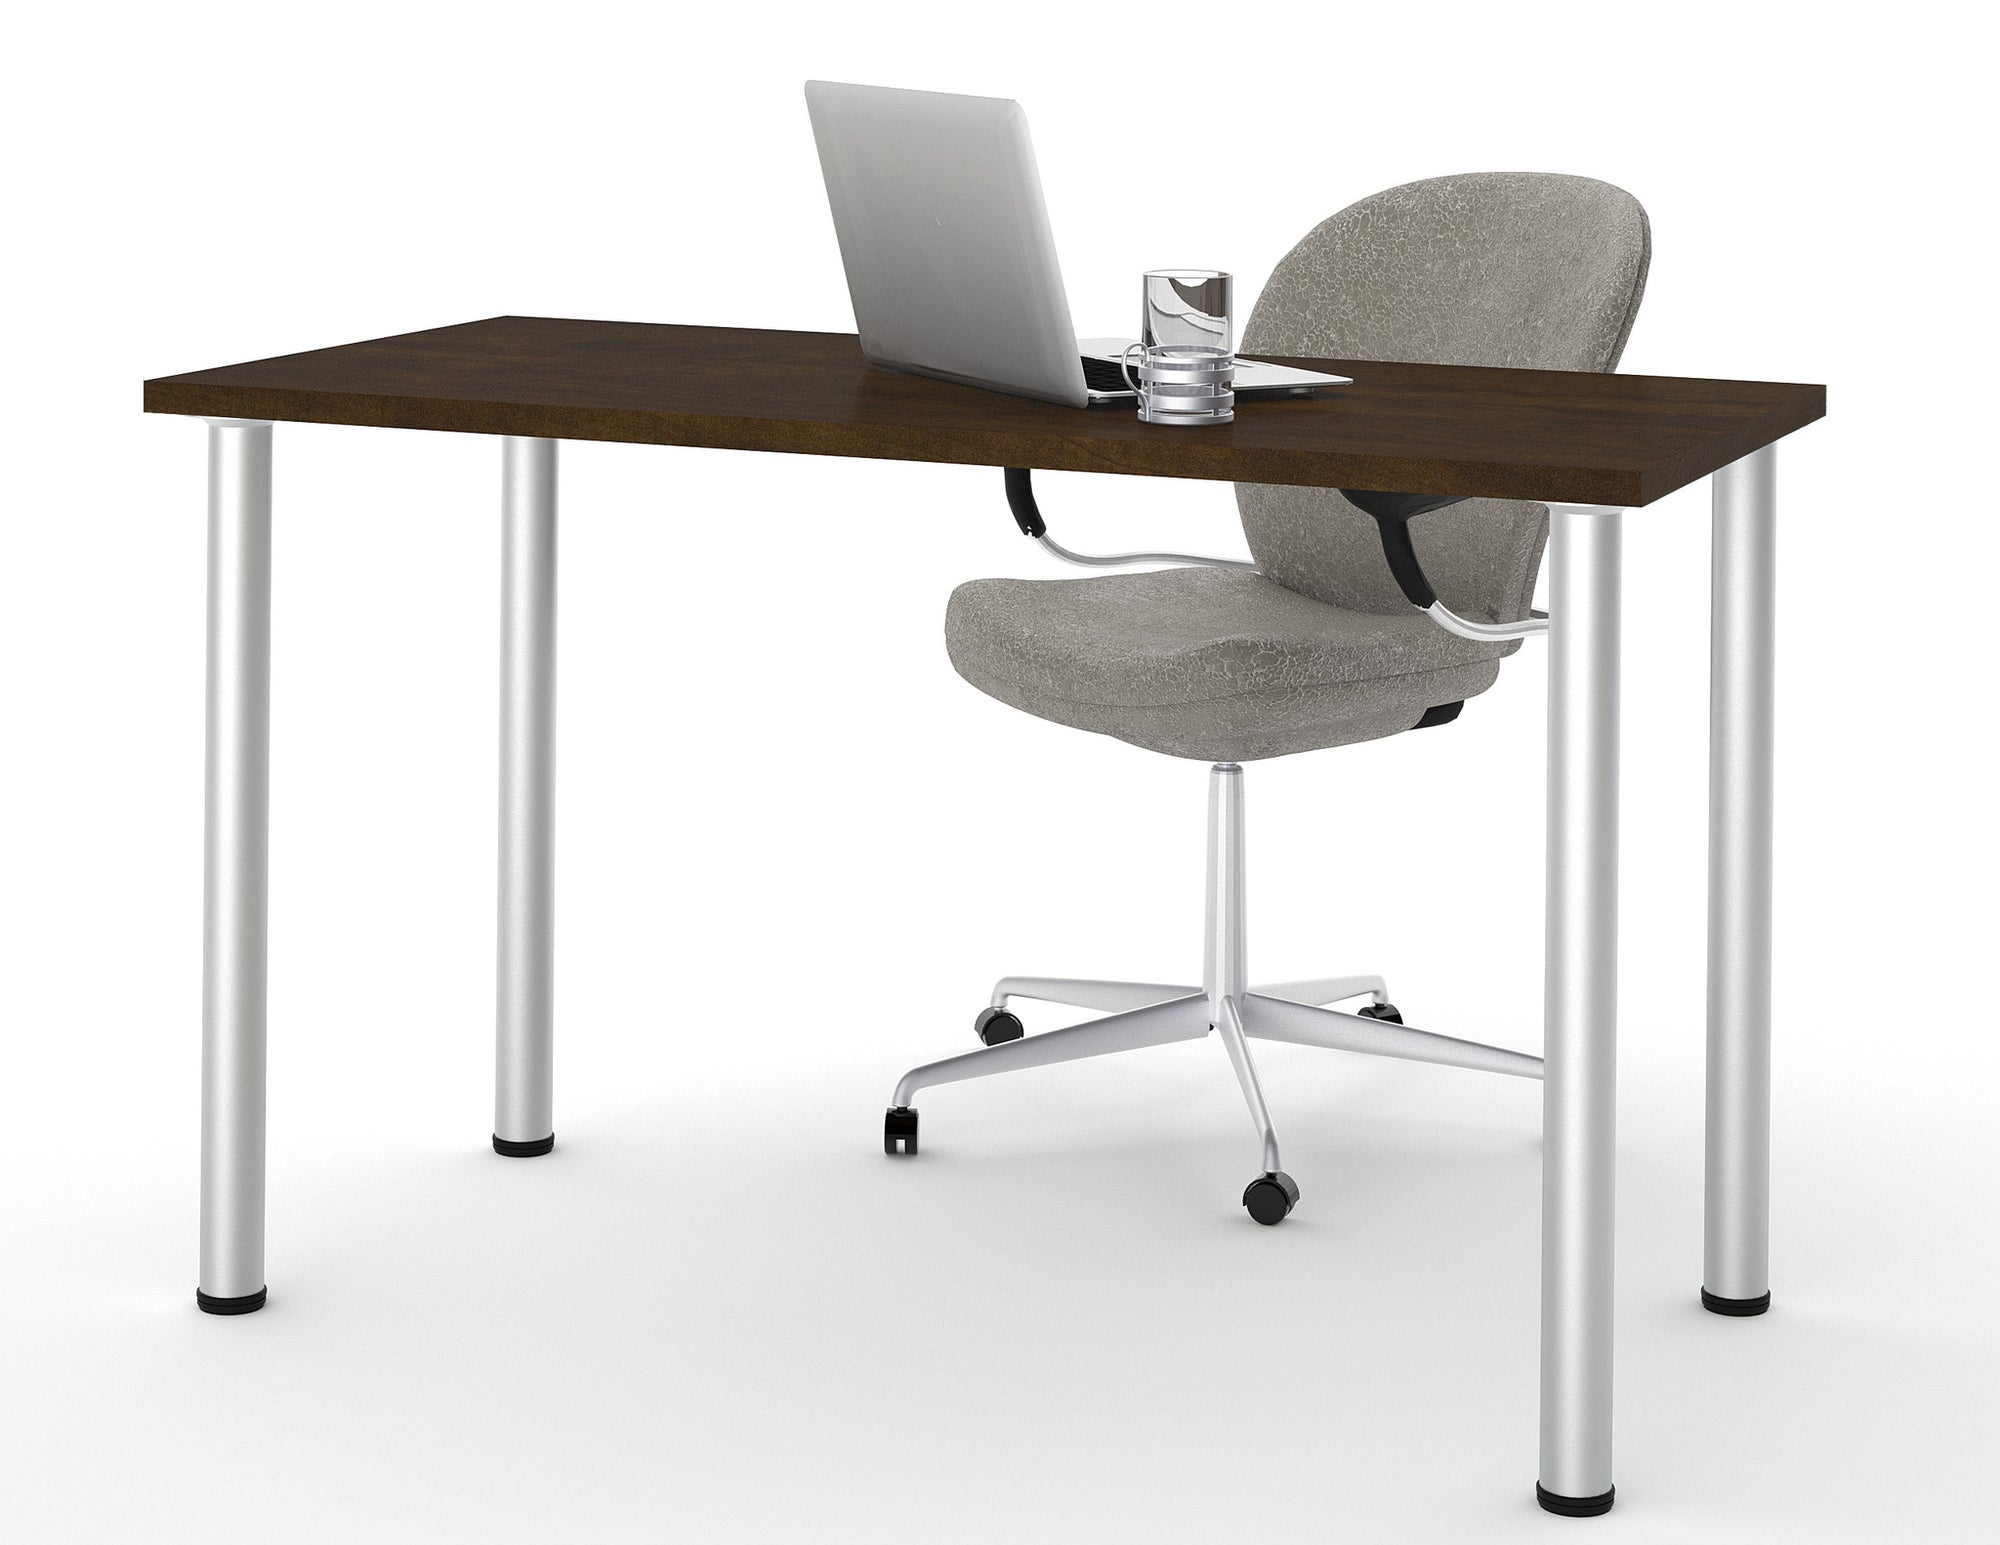 48 Premium Chocolate Office Desk With Silver Legs By Bestar